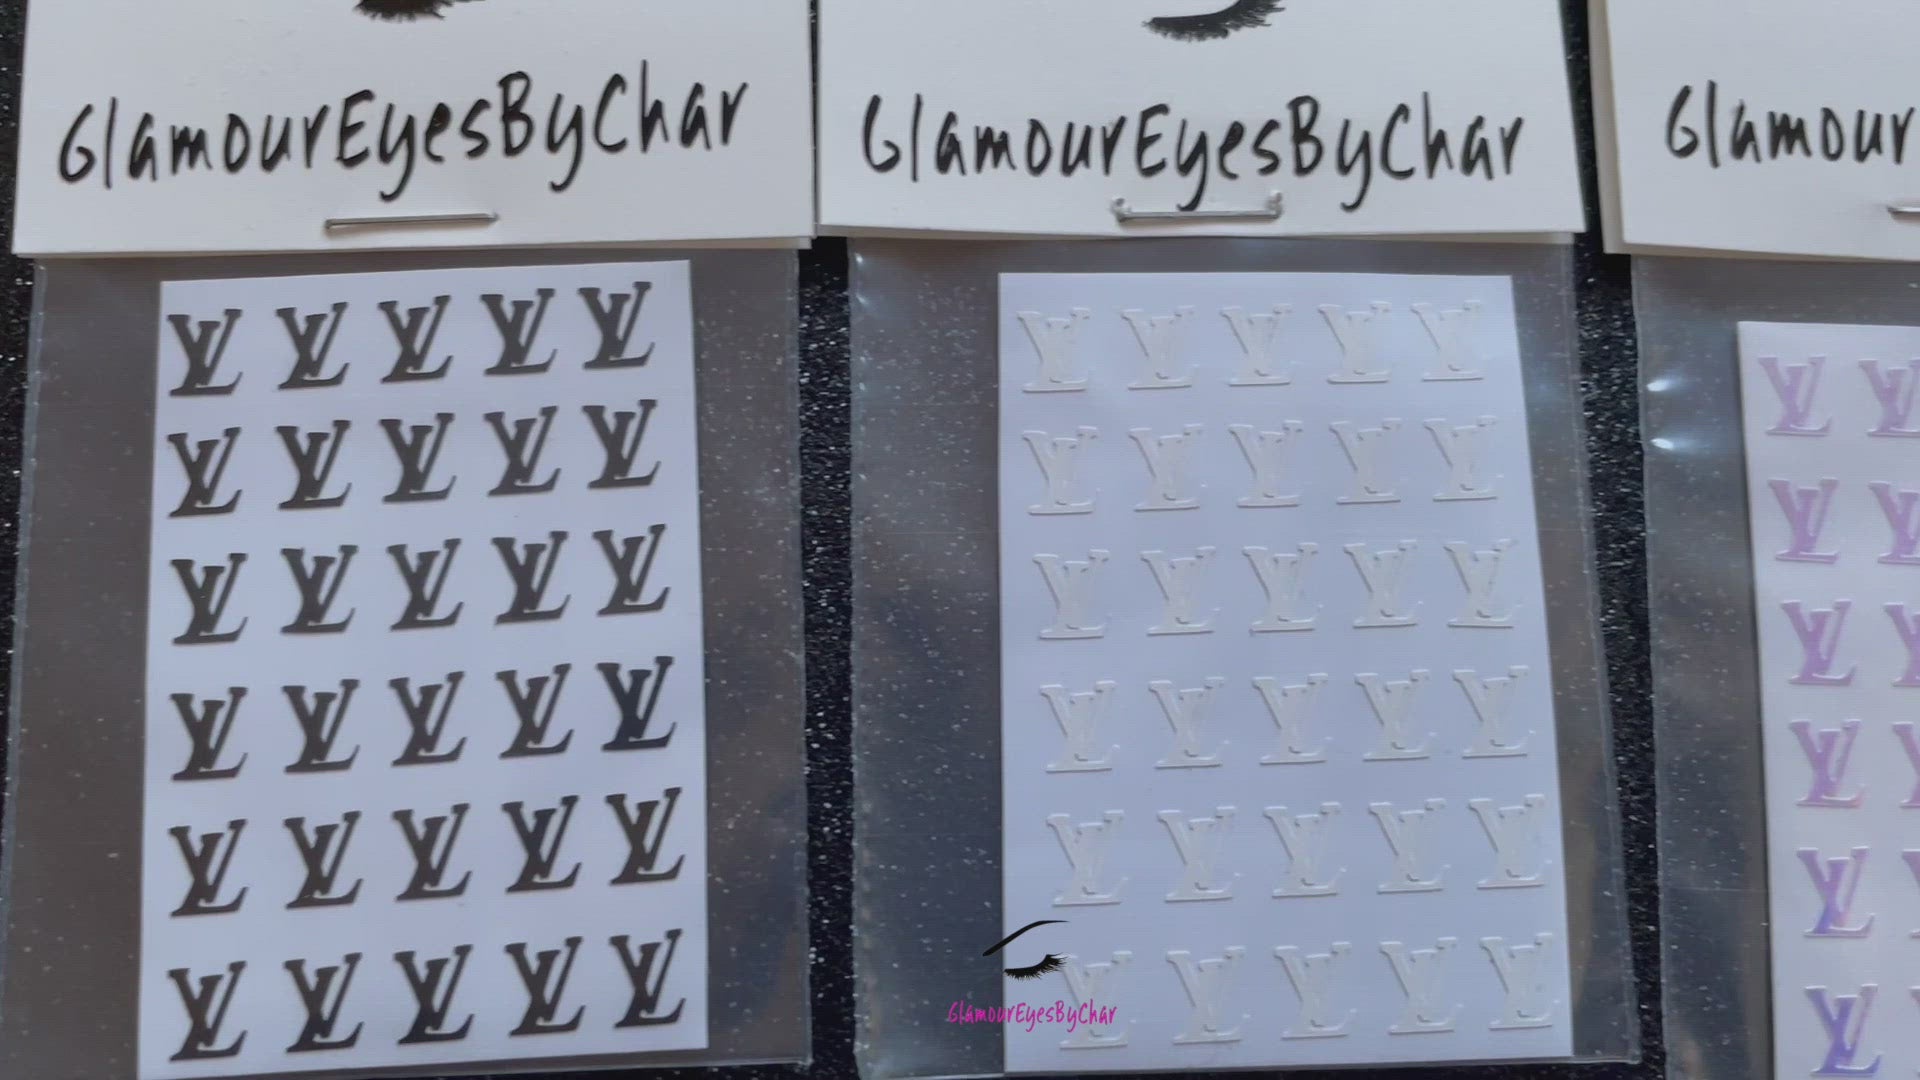 Glam Nail Decals - Mini & Classic LV Inspired Decals ( 4 x 4”)